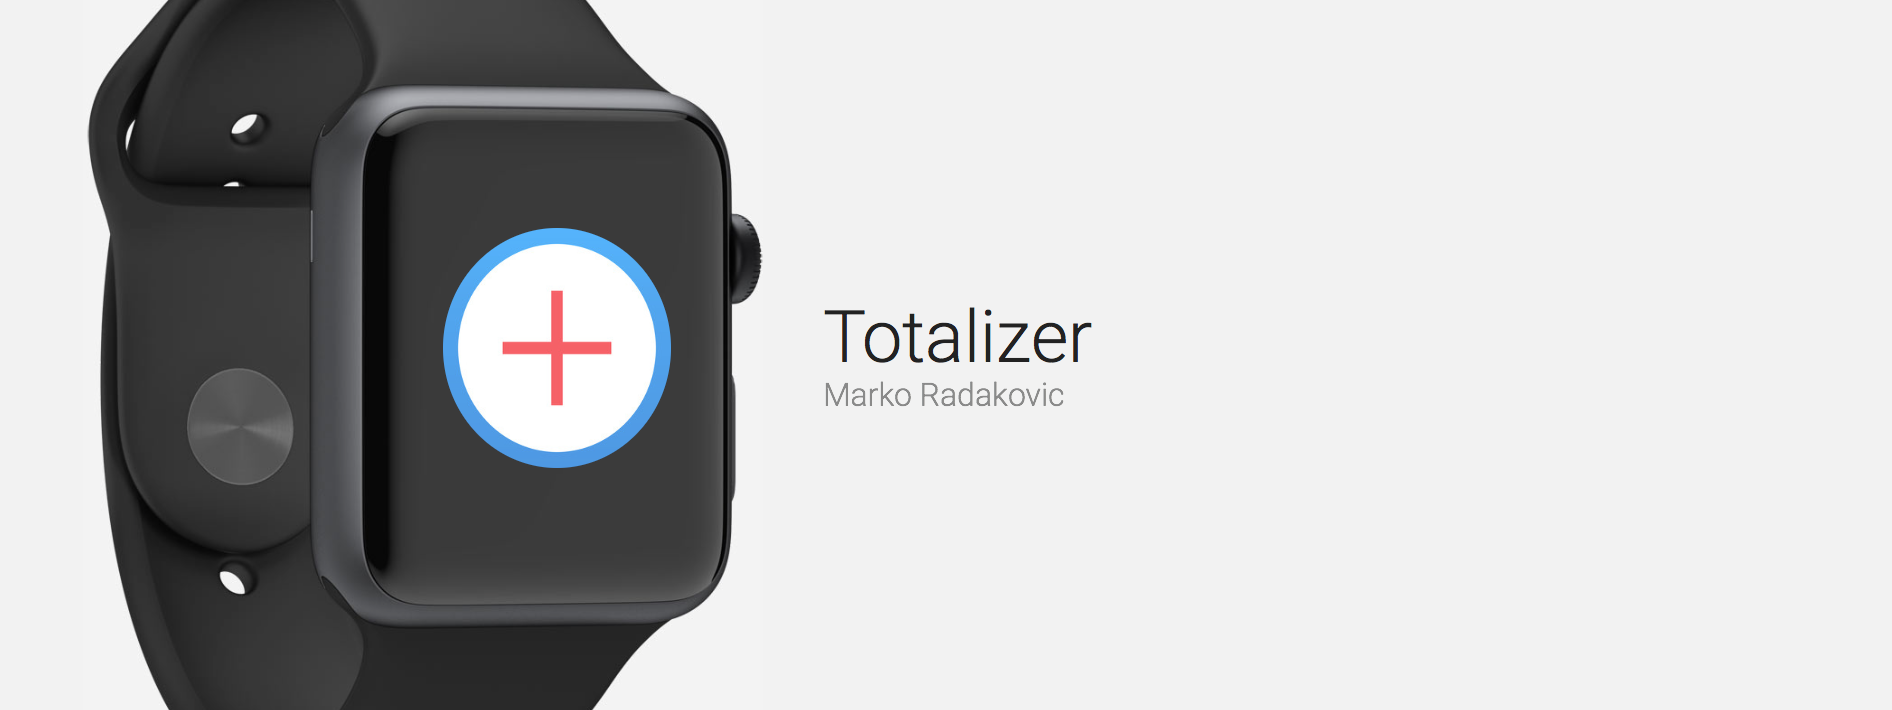 Totalizer is the Logical Calculator App for Your Apple Watch